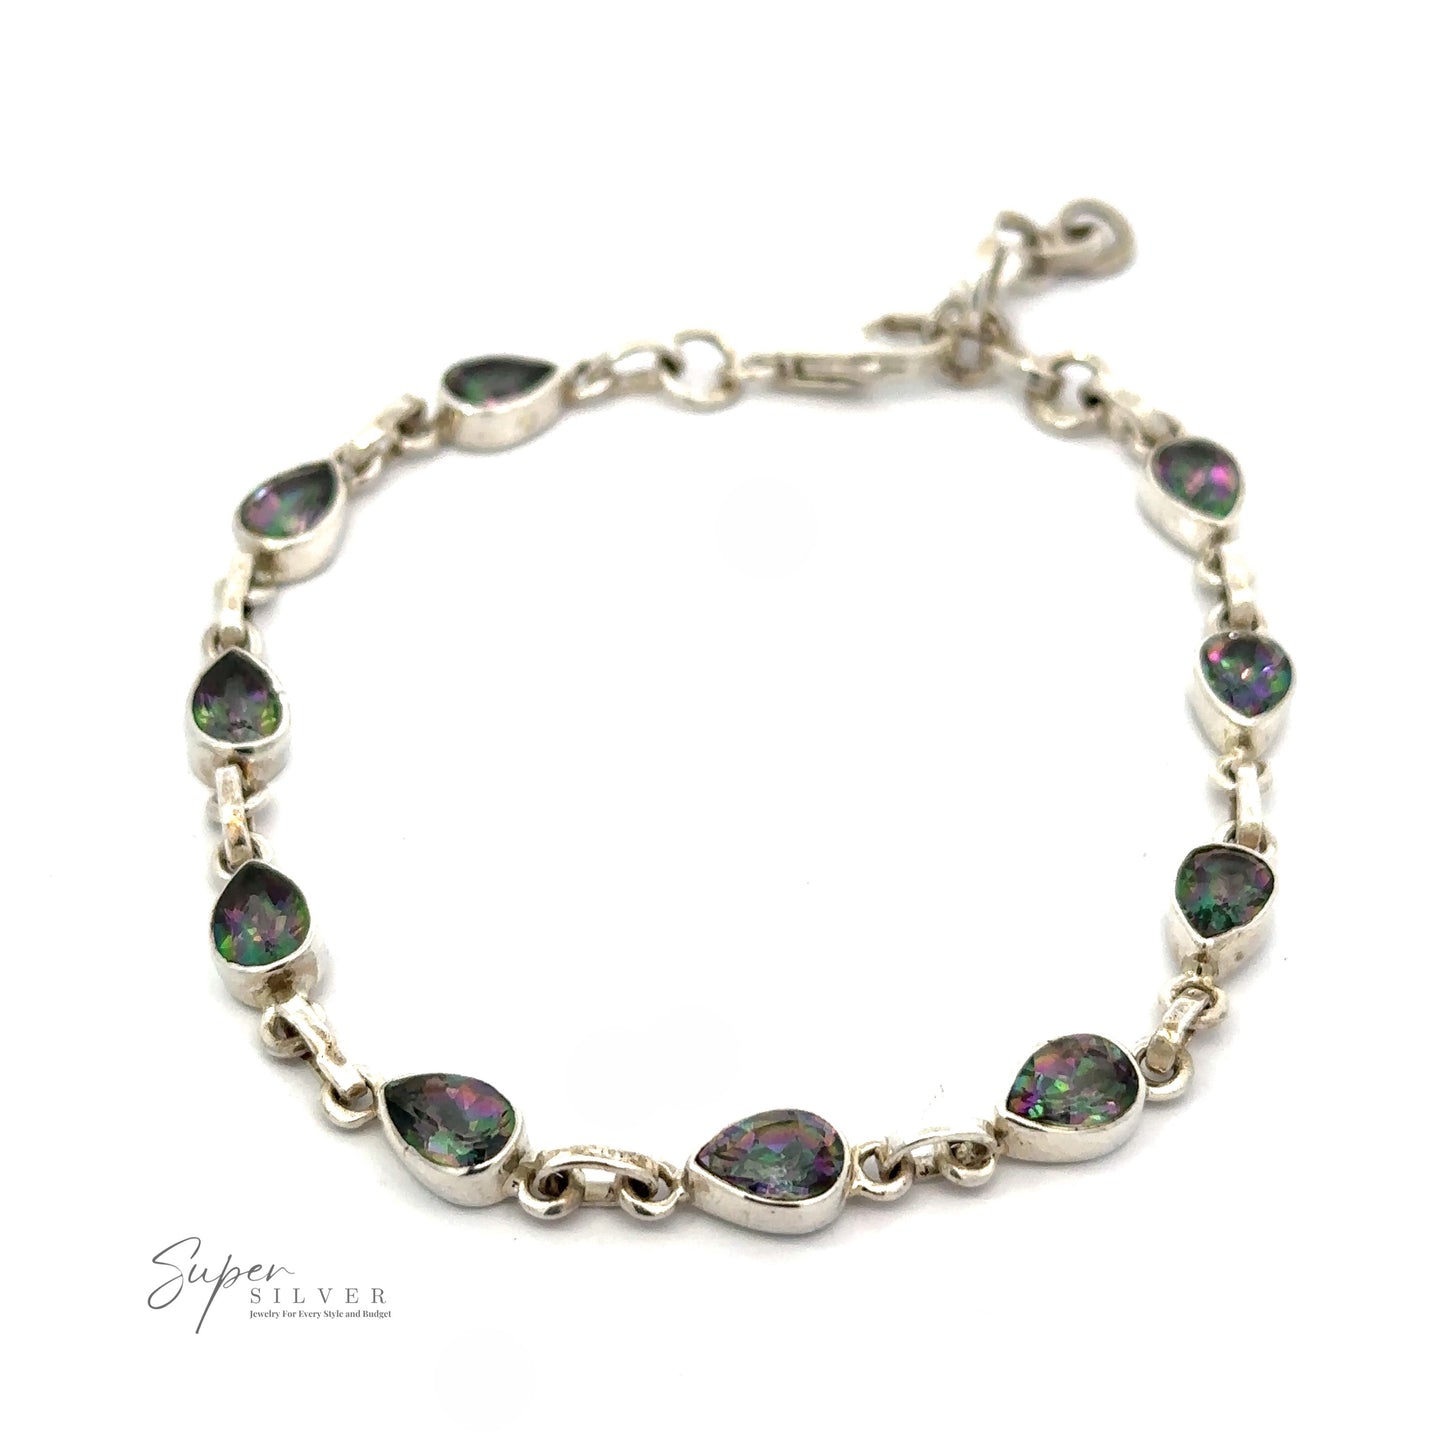 
                  
                    The Rainbow Mystic Topaz Teardrop Shape Link Bracelet features teardrop-shaped green and purple iridescent stones set in a silver chain with a clasp and adjustable chain extender. The "Super Silver" logo is visible in the lower left corner, marking this piece as a true Rainbow Mystic Topaz Teardrop Shape Link Bracelet treasure.
                  
                